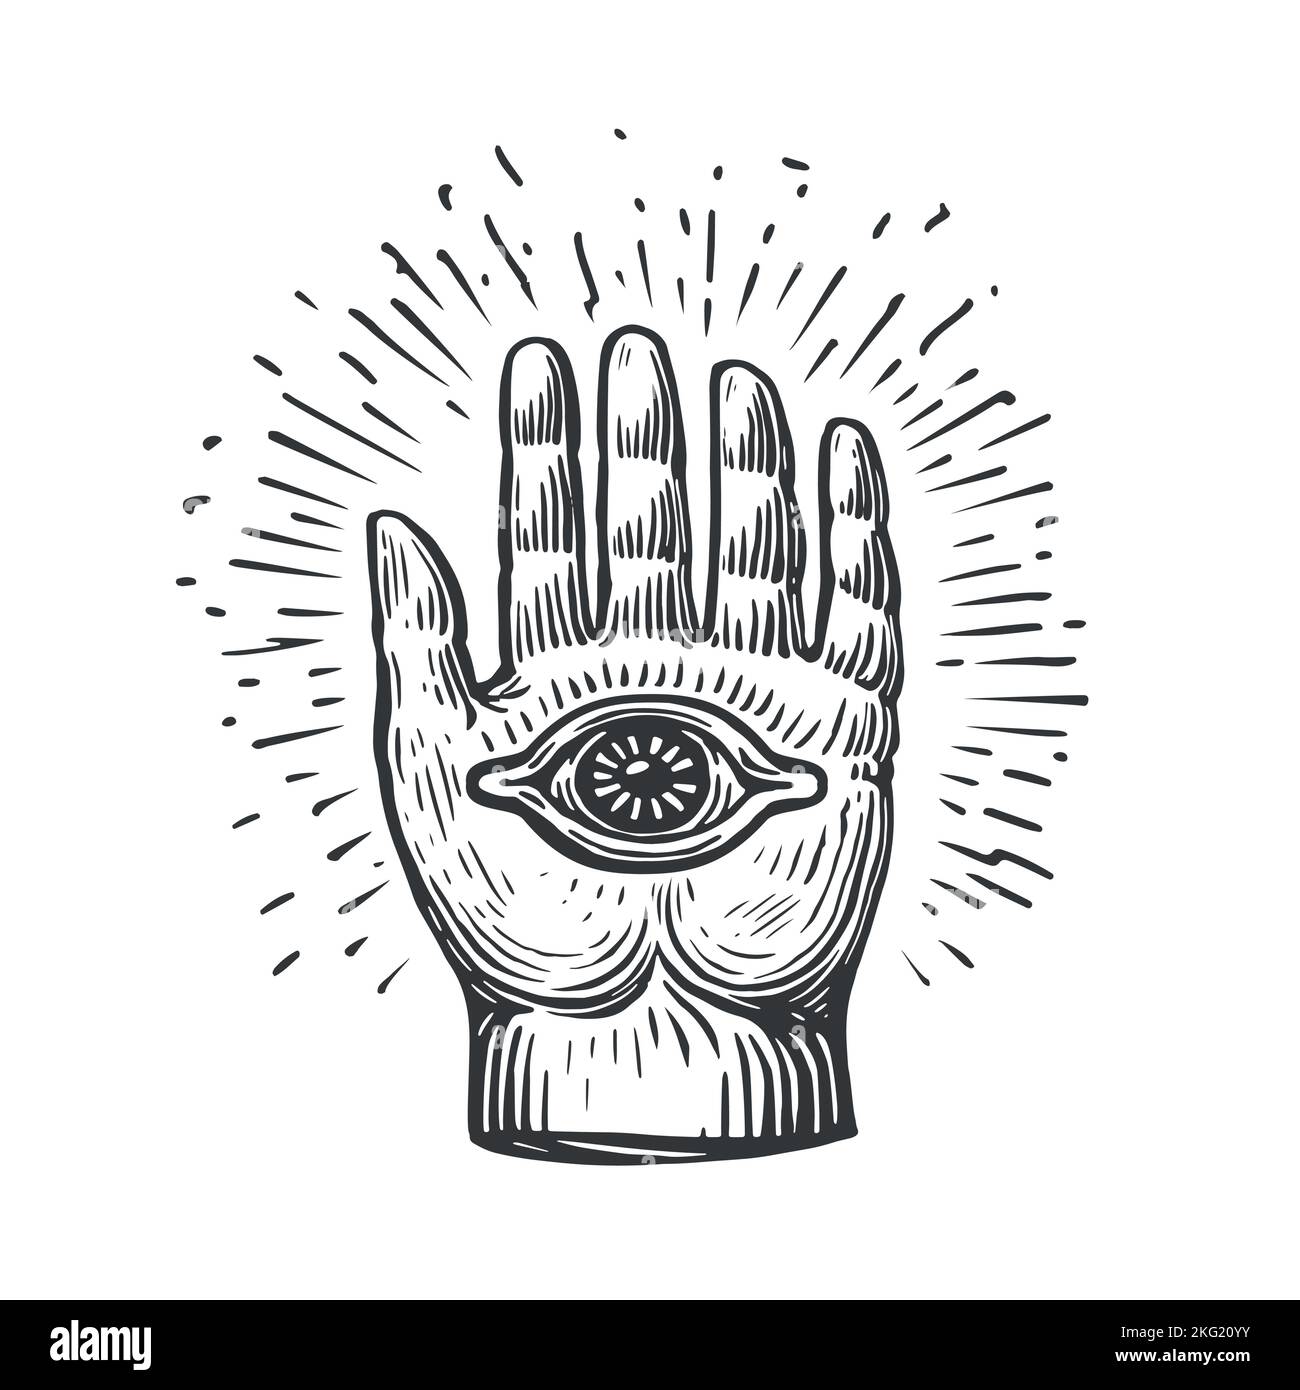 Hamsa or Hand of Fatima sign. Amulet, symbol of protection from devil eye. Hand drawn vintage sketch vector illustration Stock Vector